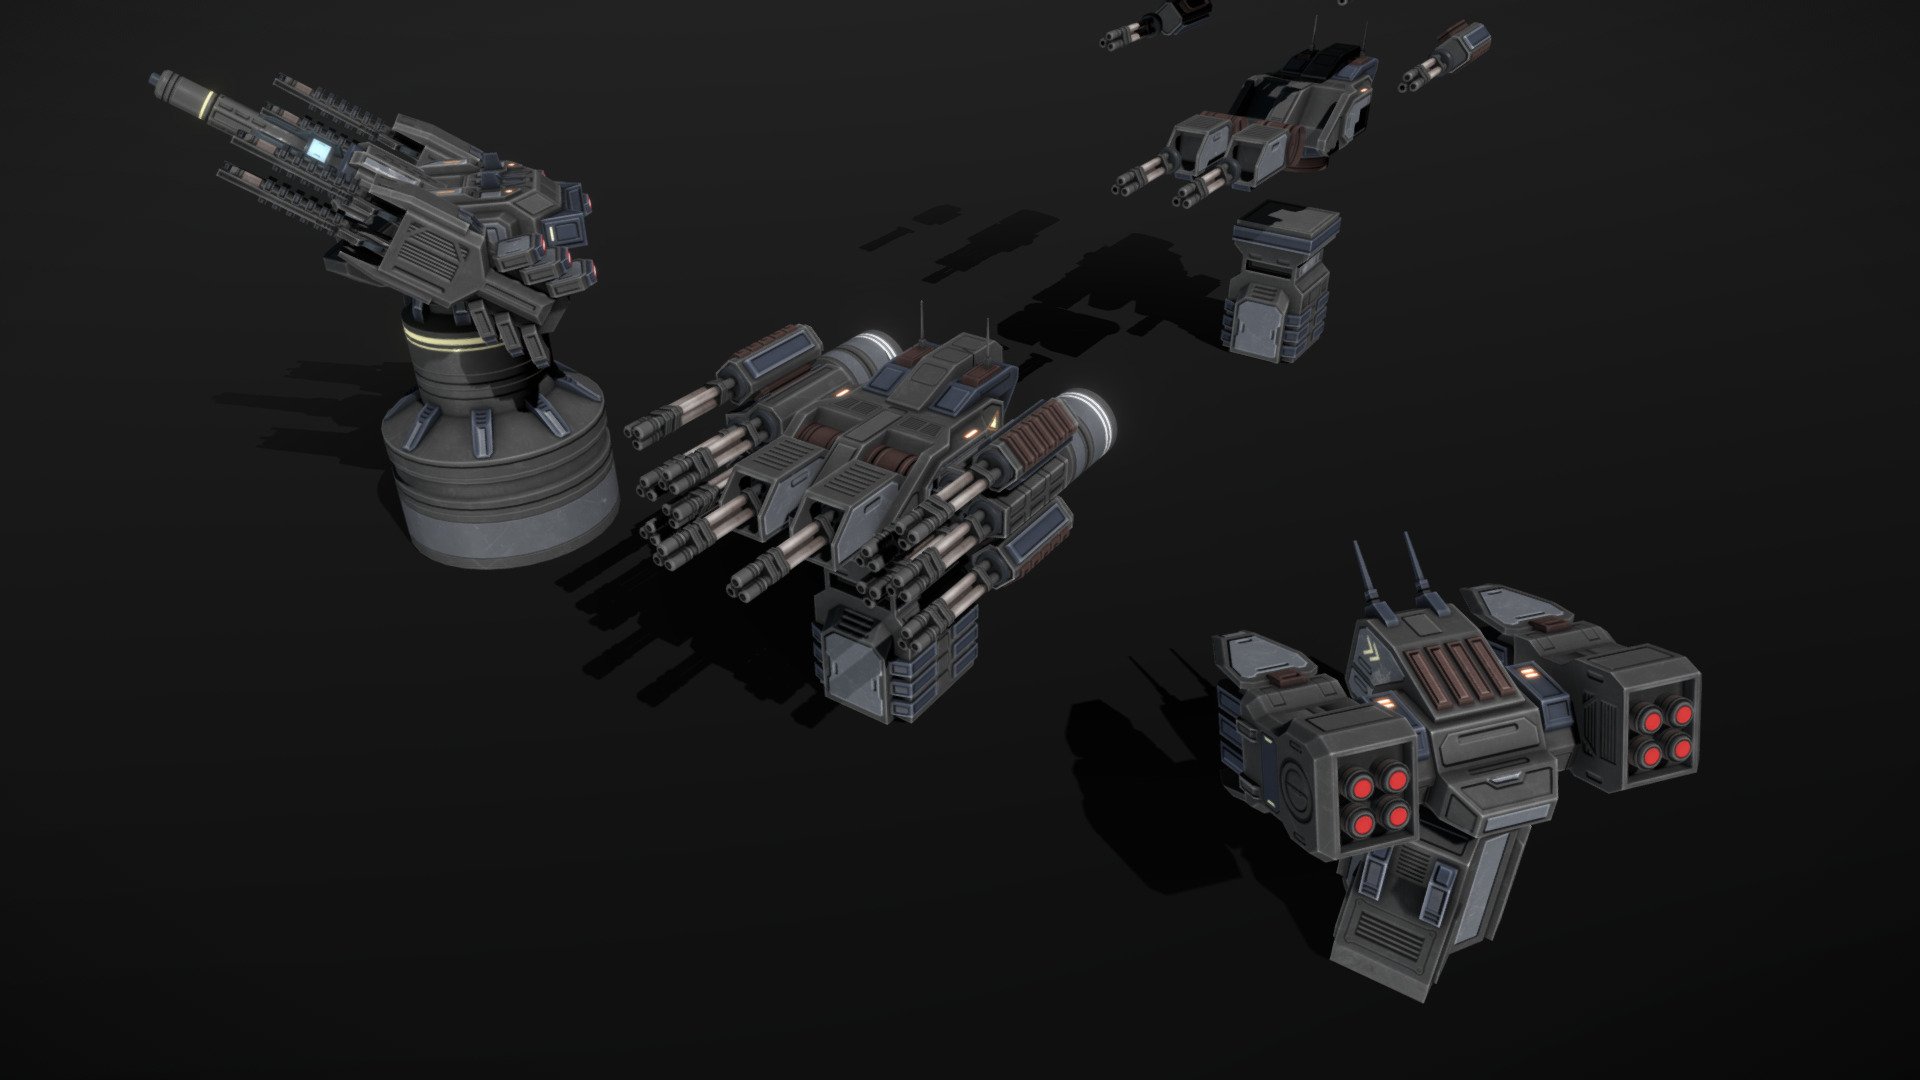 This pack contains low-poly and game-ready modular scifi turret parts. The barrels/missile racks from the “Modular Mech Weapons” pack are compatible with these turrets.

The turrets are composed of separate meshes that can be animated with a keyframe animation tool. 

The following modular parts are included in this model pack: 3 bases, 3 turrets, 9 side pods, 6 barrels, 2 missile launcher pods, 2 missiles. (not all parts are shown in the sketchfab viewer).

The model comes with several differently colored texture sets. The PSD file with intact layers is included.

Please note: The textures in the Sketchfab viewer have a reduced resolution to improve Sketchfab loading speed.

If you have bought this model please make sure to download the “additional file”.  It contains FBX and OBJ meshes, full resolution textures and the source PSDs with intact layers. The meshes are separate and can be animated (e.g. firing animations) 3d model